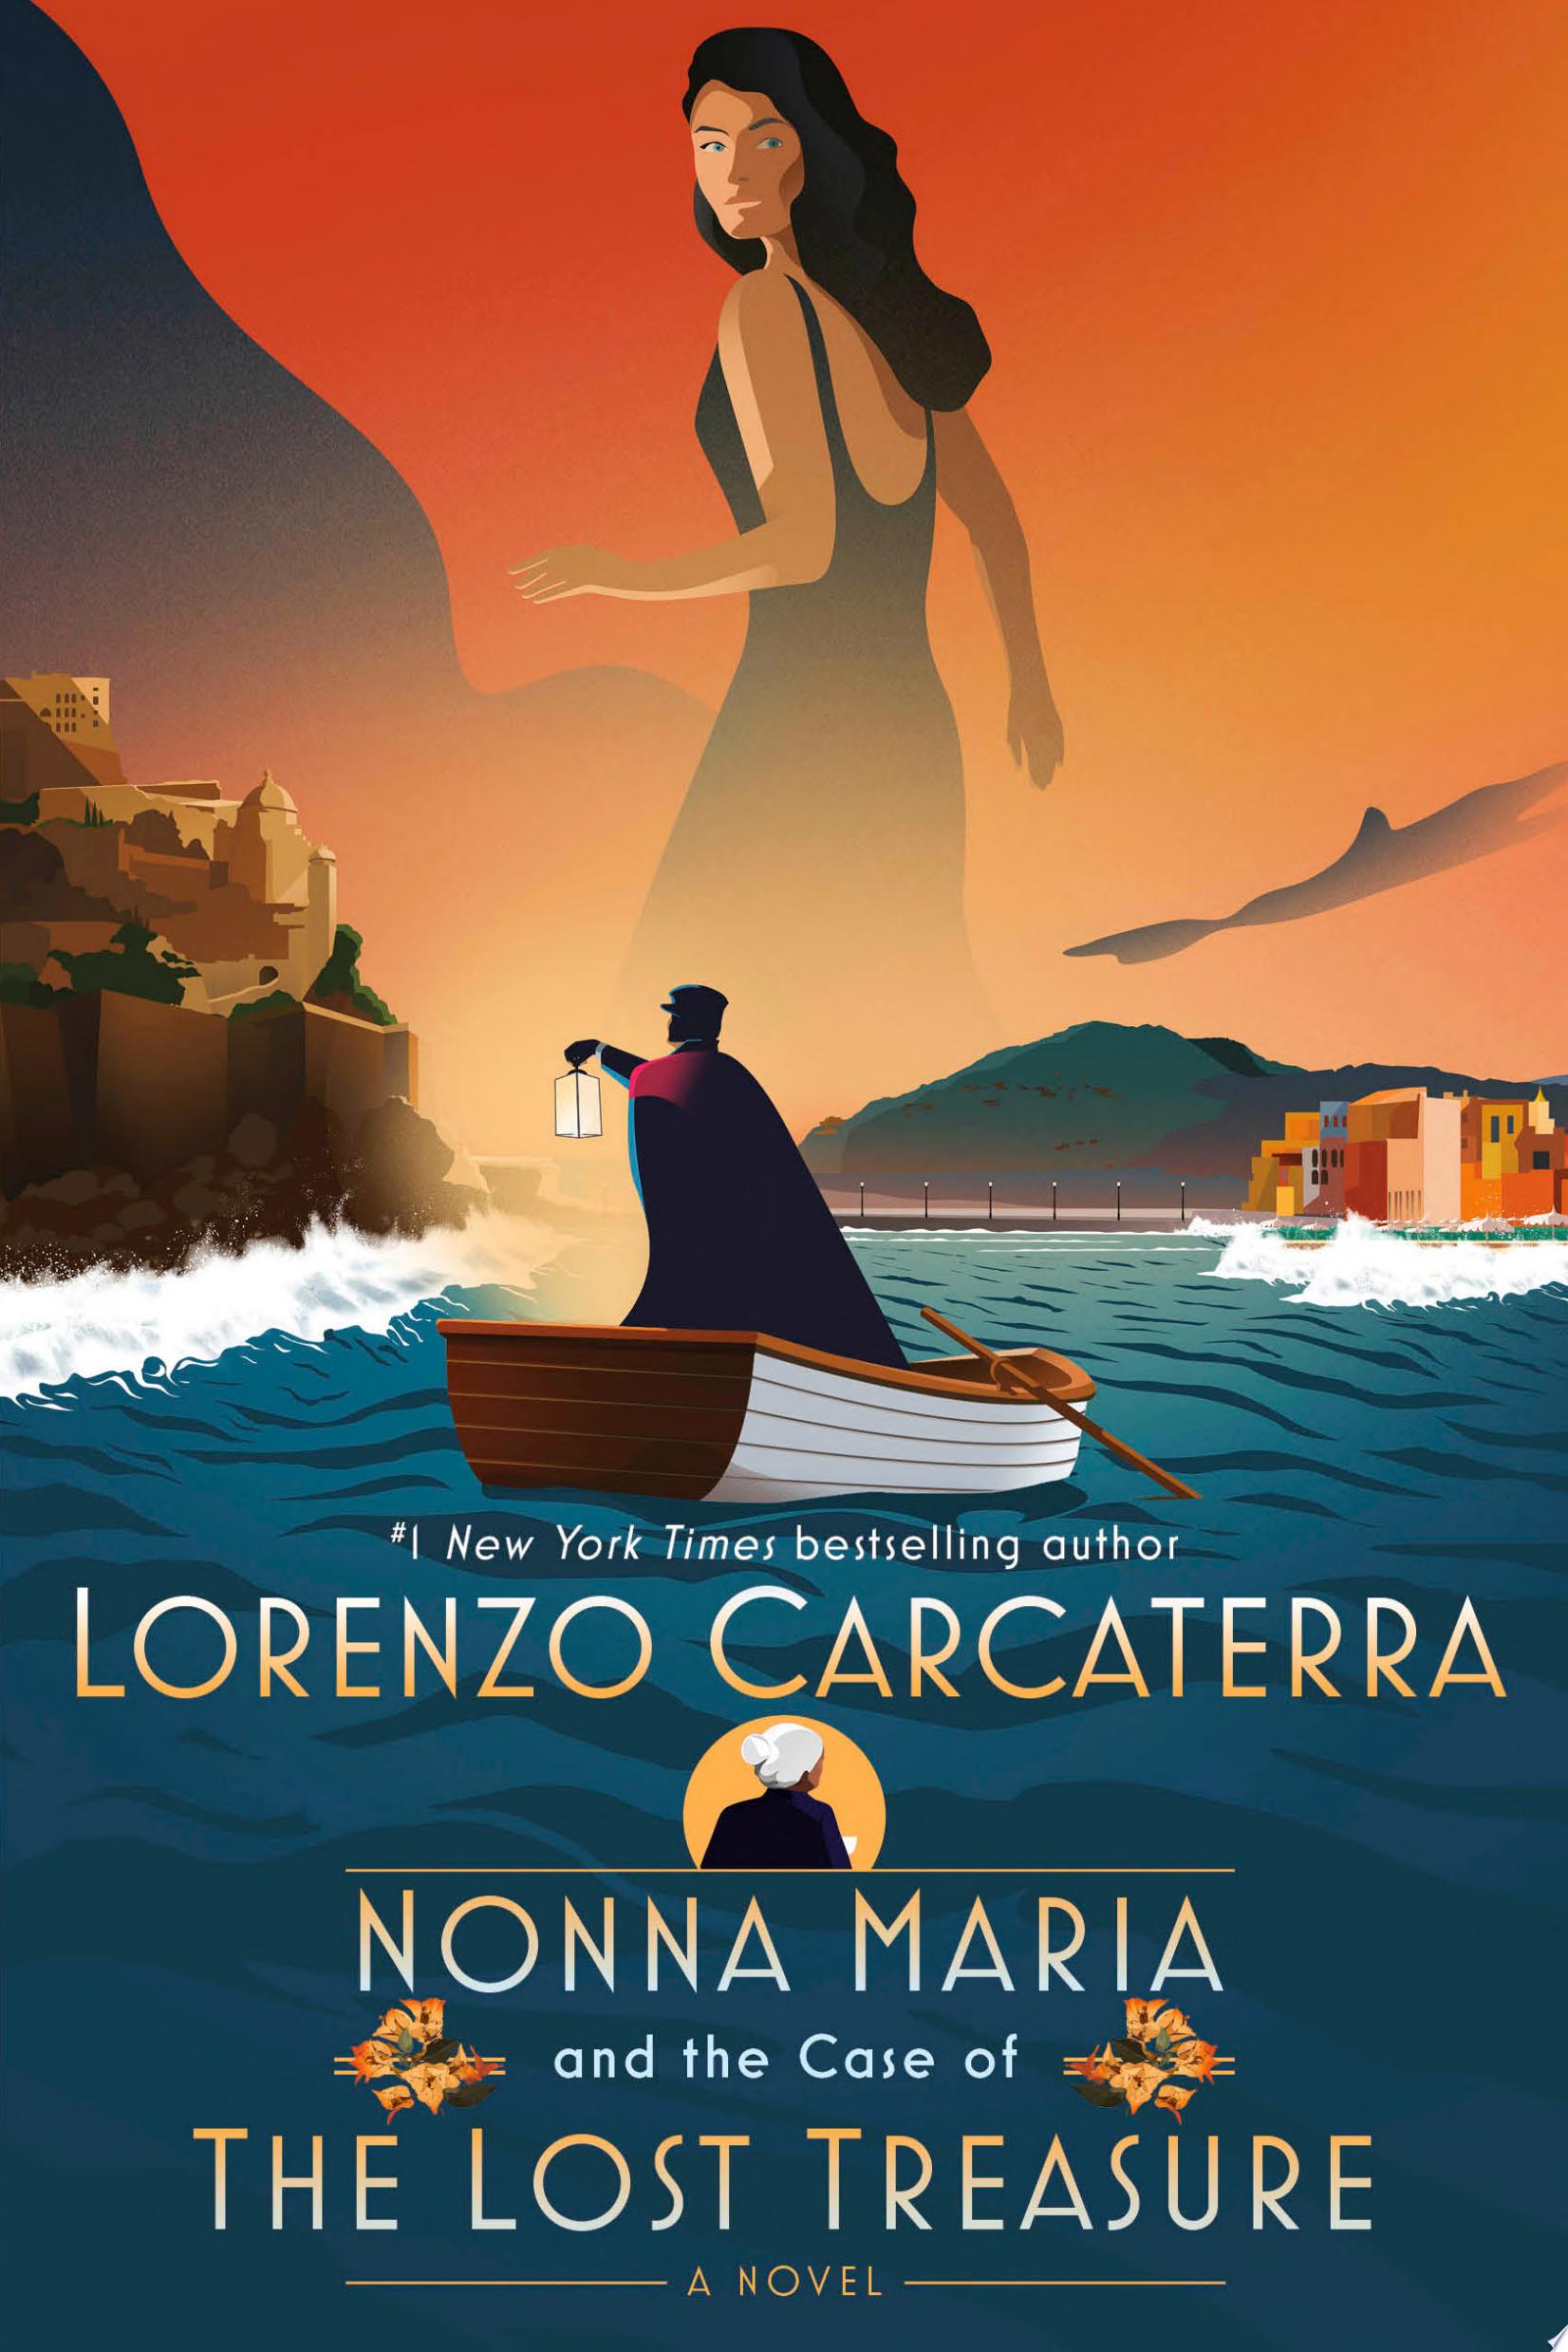 Image for "Nonna Maria and the Case of the Lost Treasure"